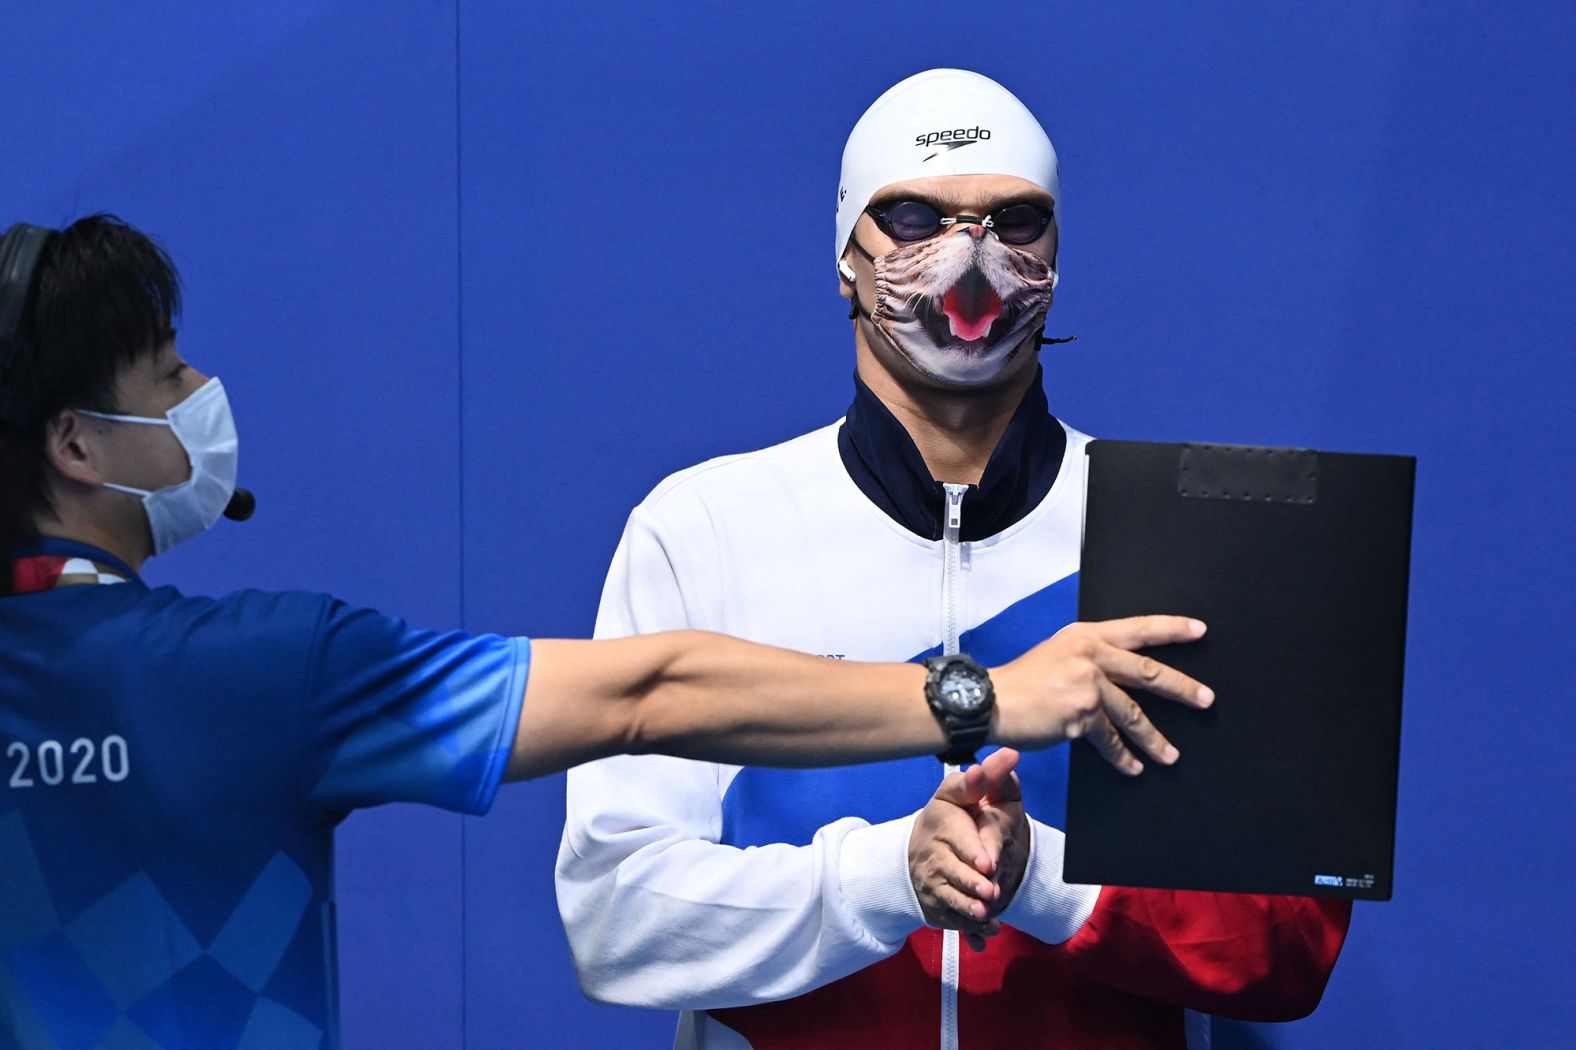 Russian swimmer Evgeny Rylov wears a cat-themed mask as he waits to receive his gold medal on July 27. <a href="https://www.cnn.com/world/live-news/tokyo-2020-olympics-07-26-21-spt/h_ca80c586169141bbb5c36a560e96b1cf" target="_blank">Rylov won the 100-meter backstroke.</a>